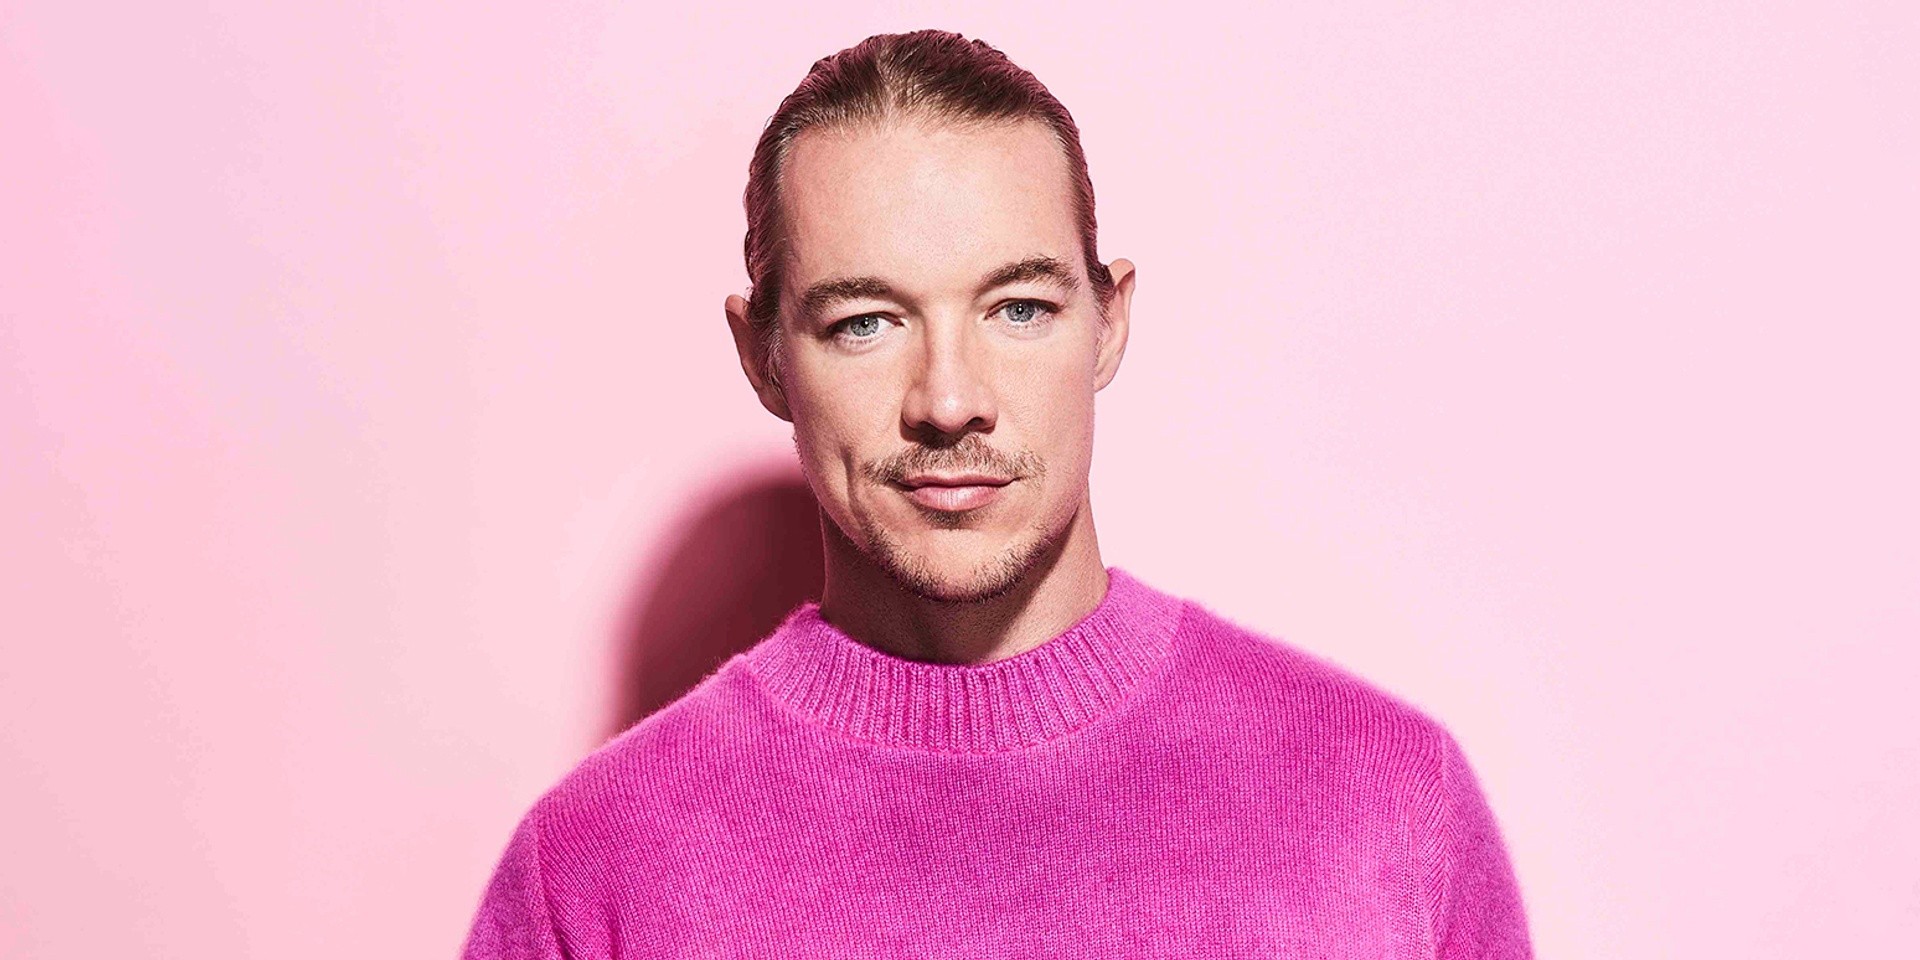 Diplo releases house EP, features collaborations from Tove Lo and more – listen